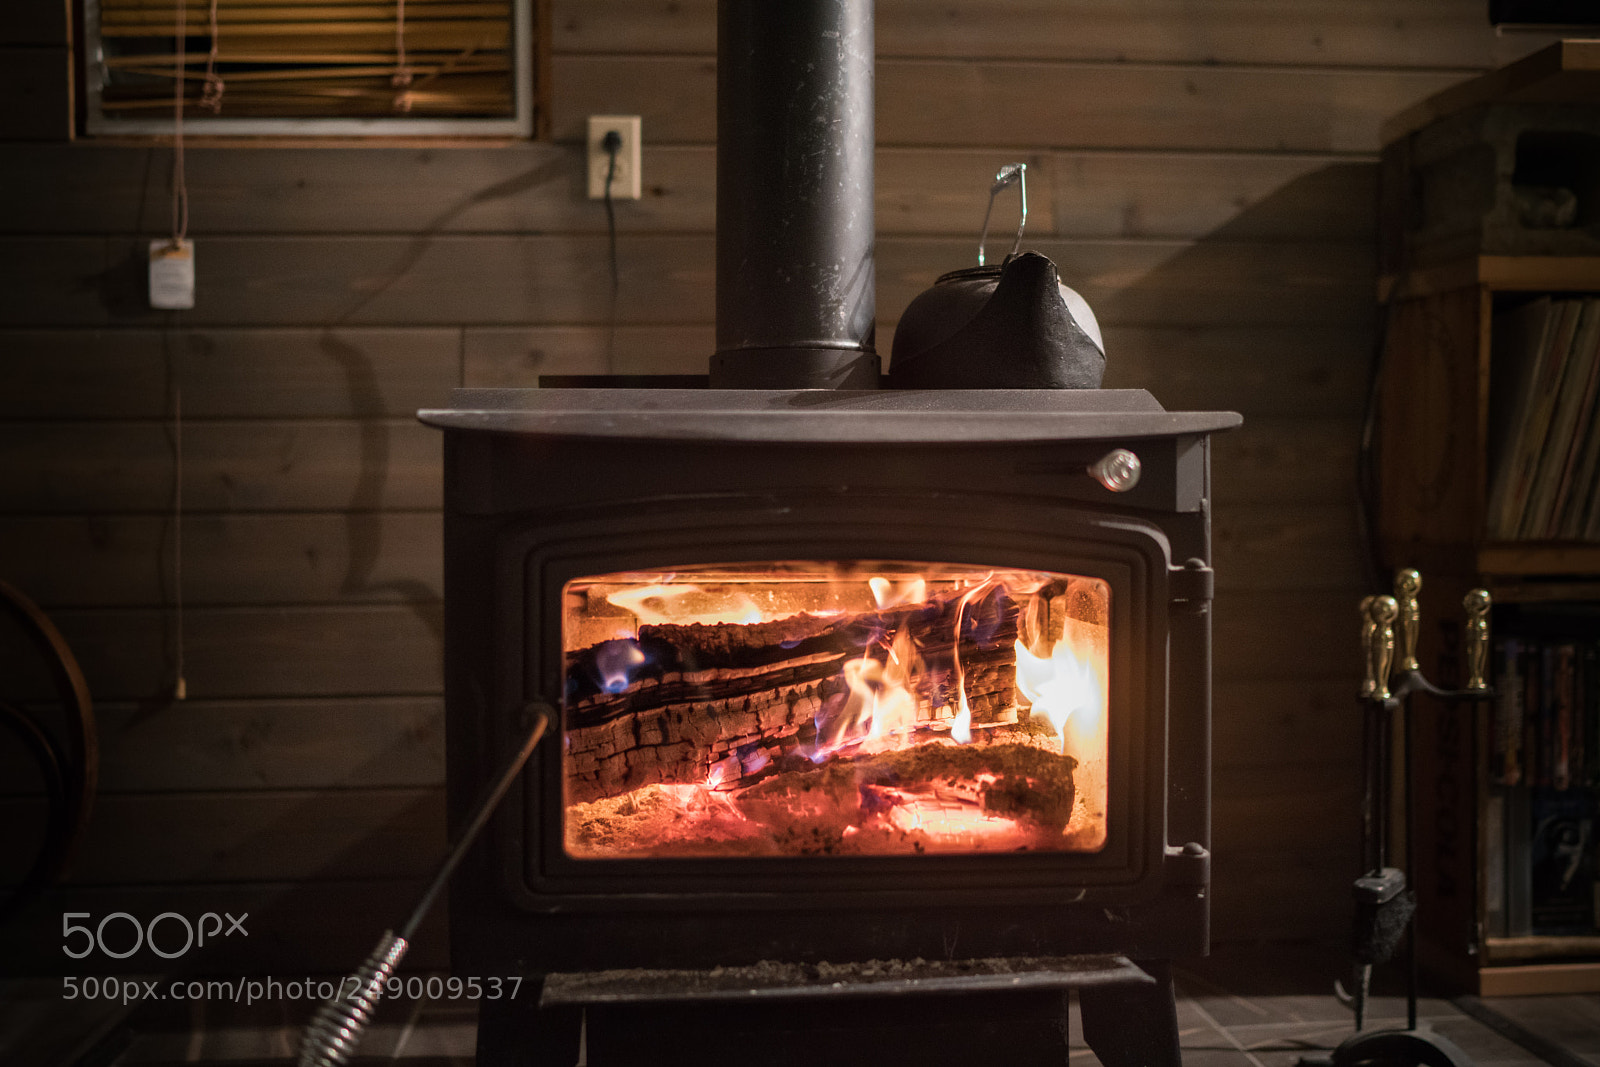 Sony a7R II sample photo. Keeping warm by the photography